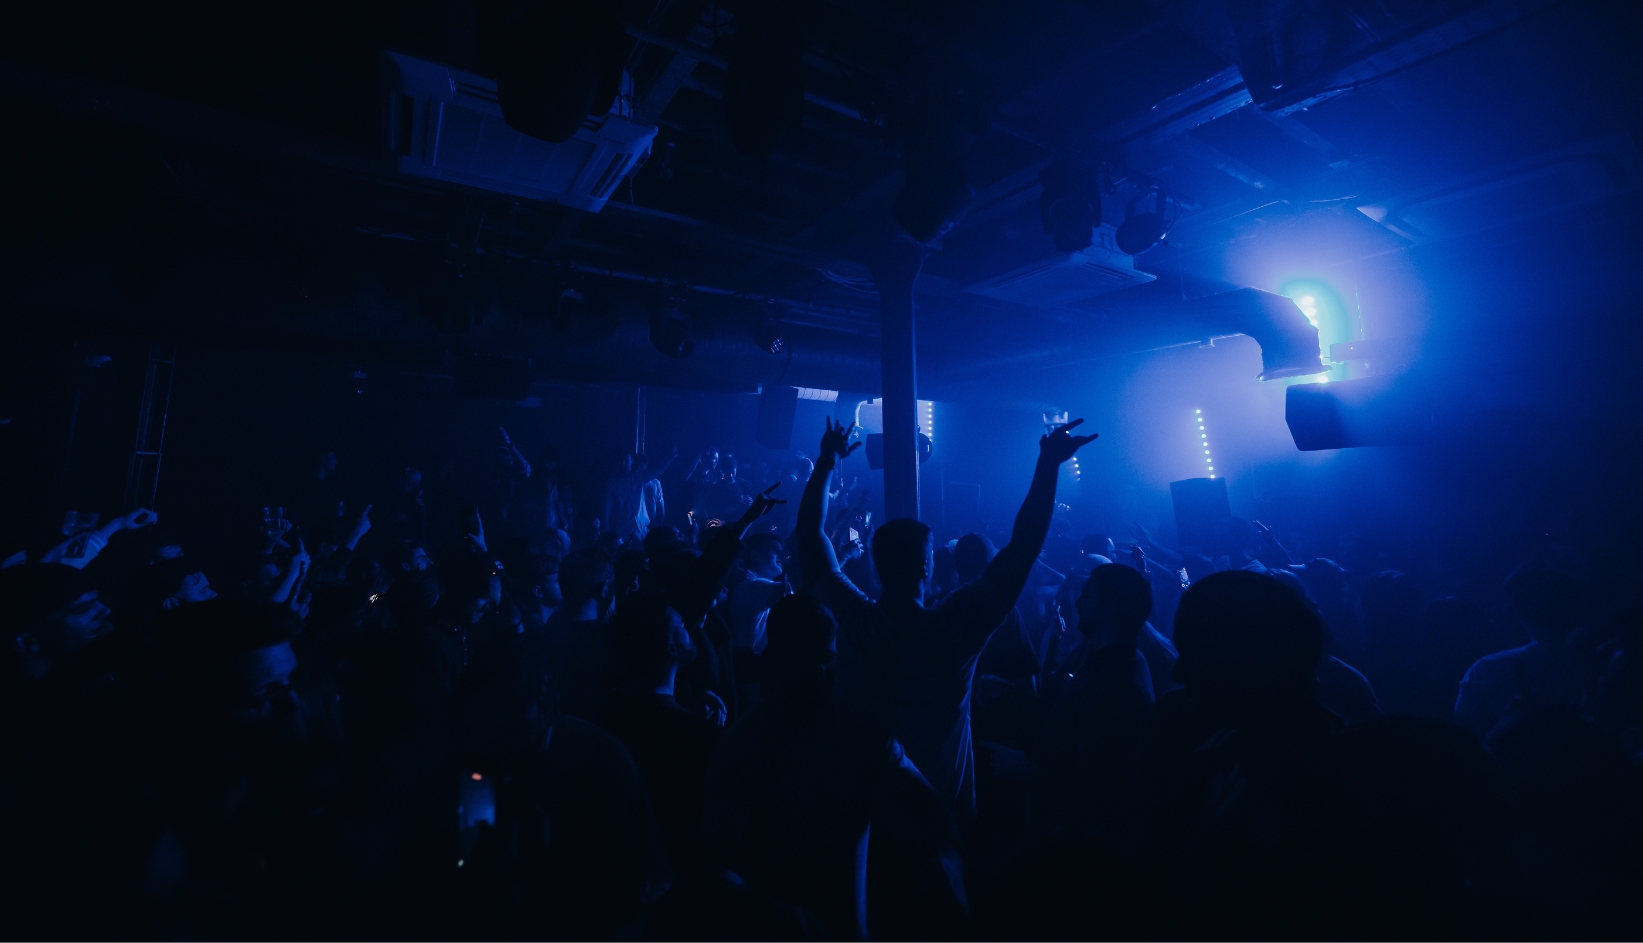 XOYO London Residency Series Continues With Legendary Kool FM